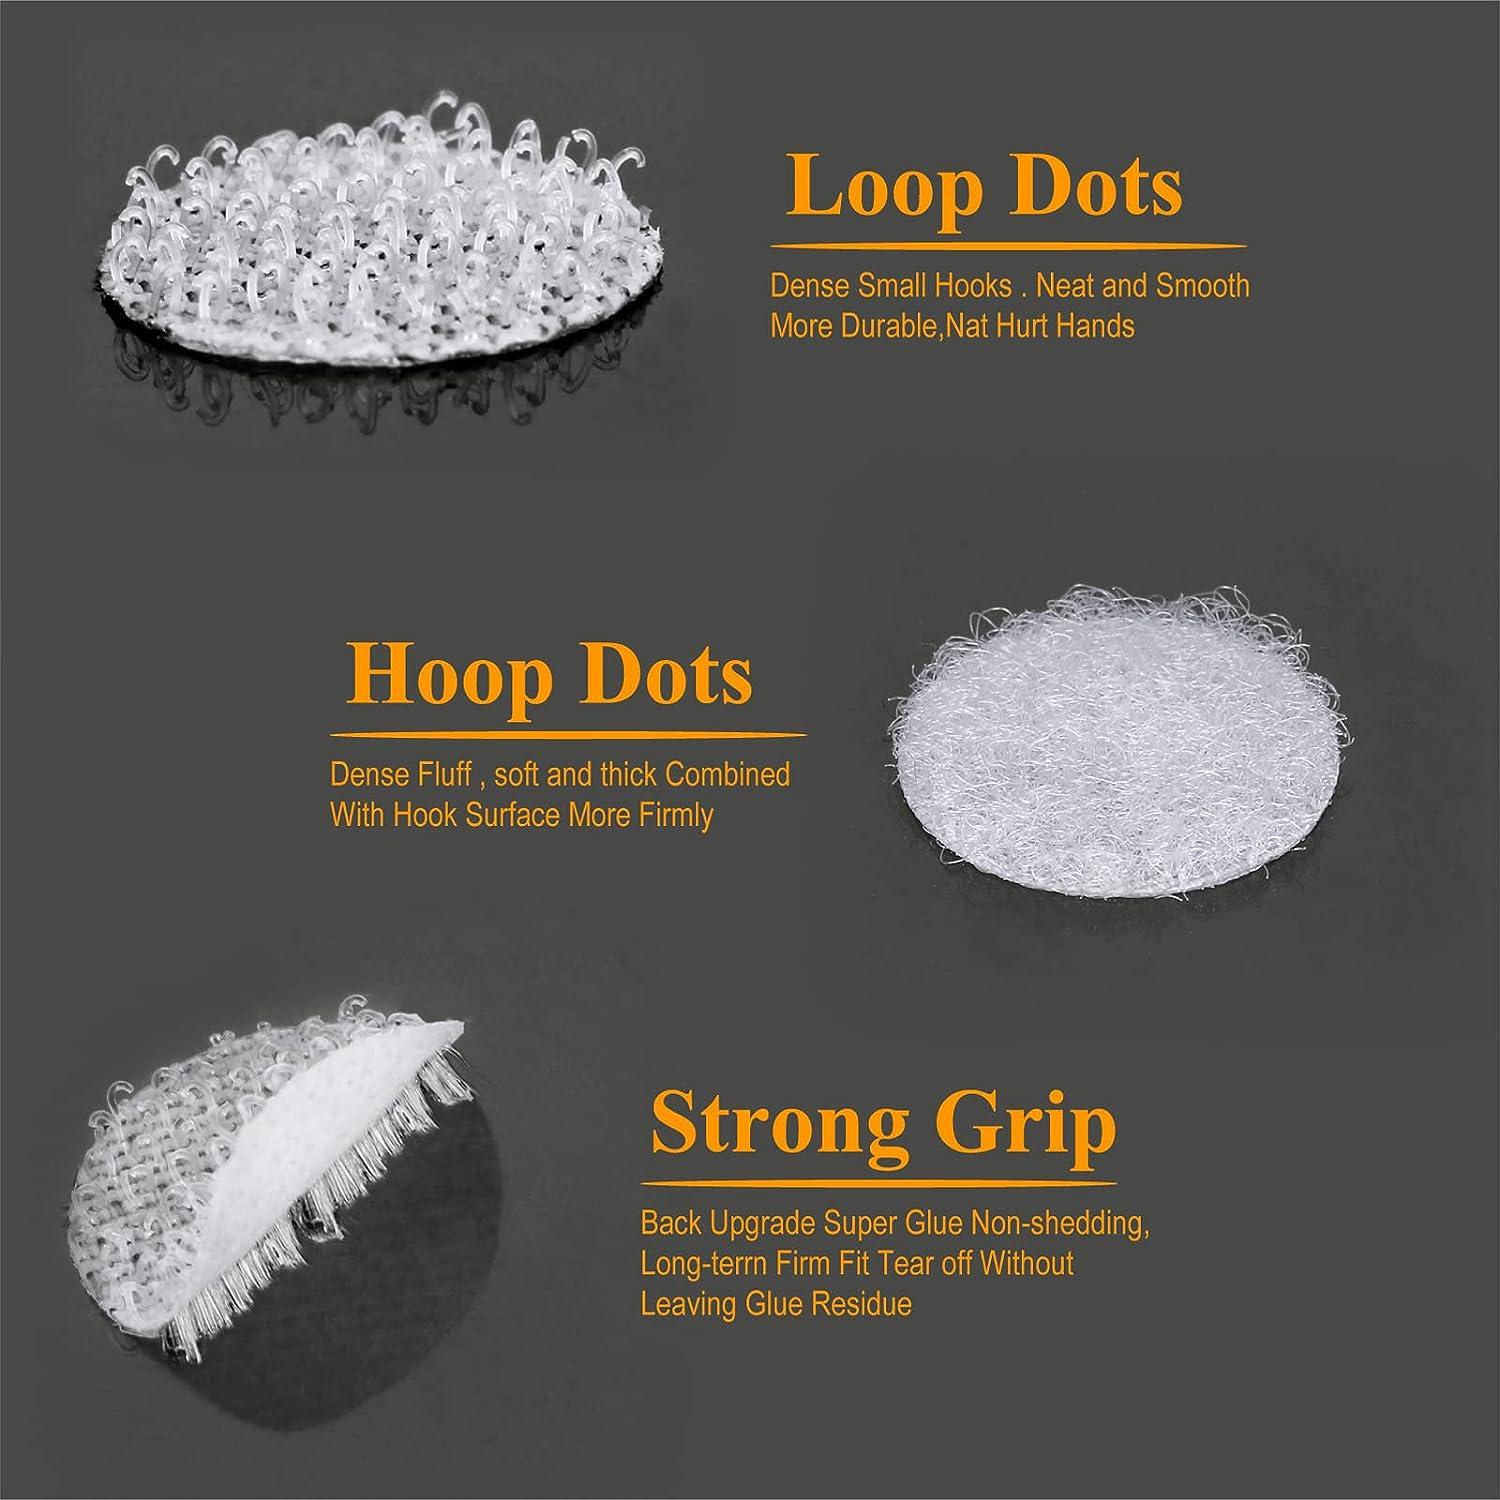 Self Adhesive Dots - 1200pcs (600 Pairs) 0.59 Diameter Sticky Back Hook and  Loop Coins for School Office Home Mounting Arts & Crafts